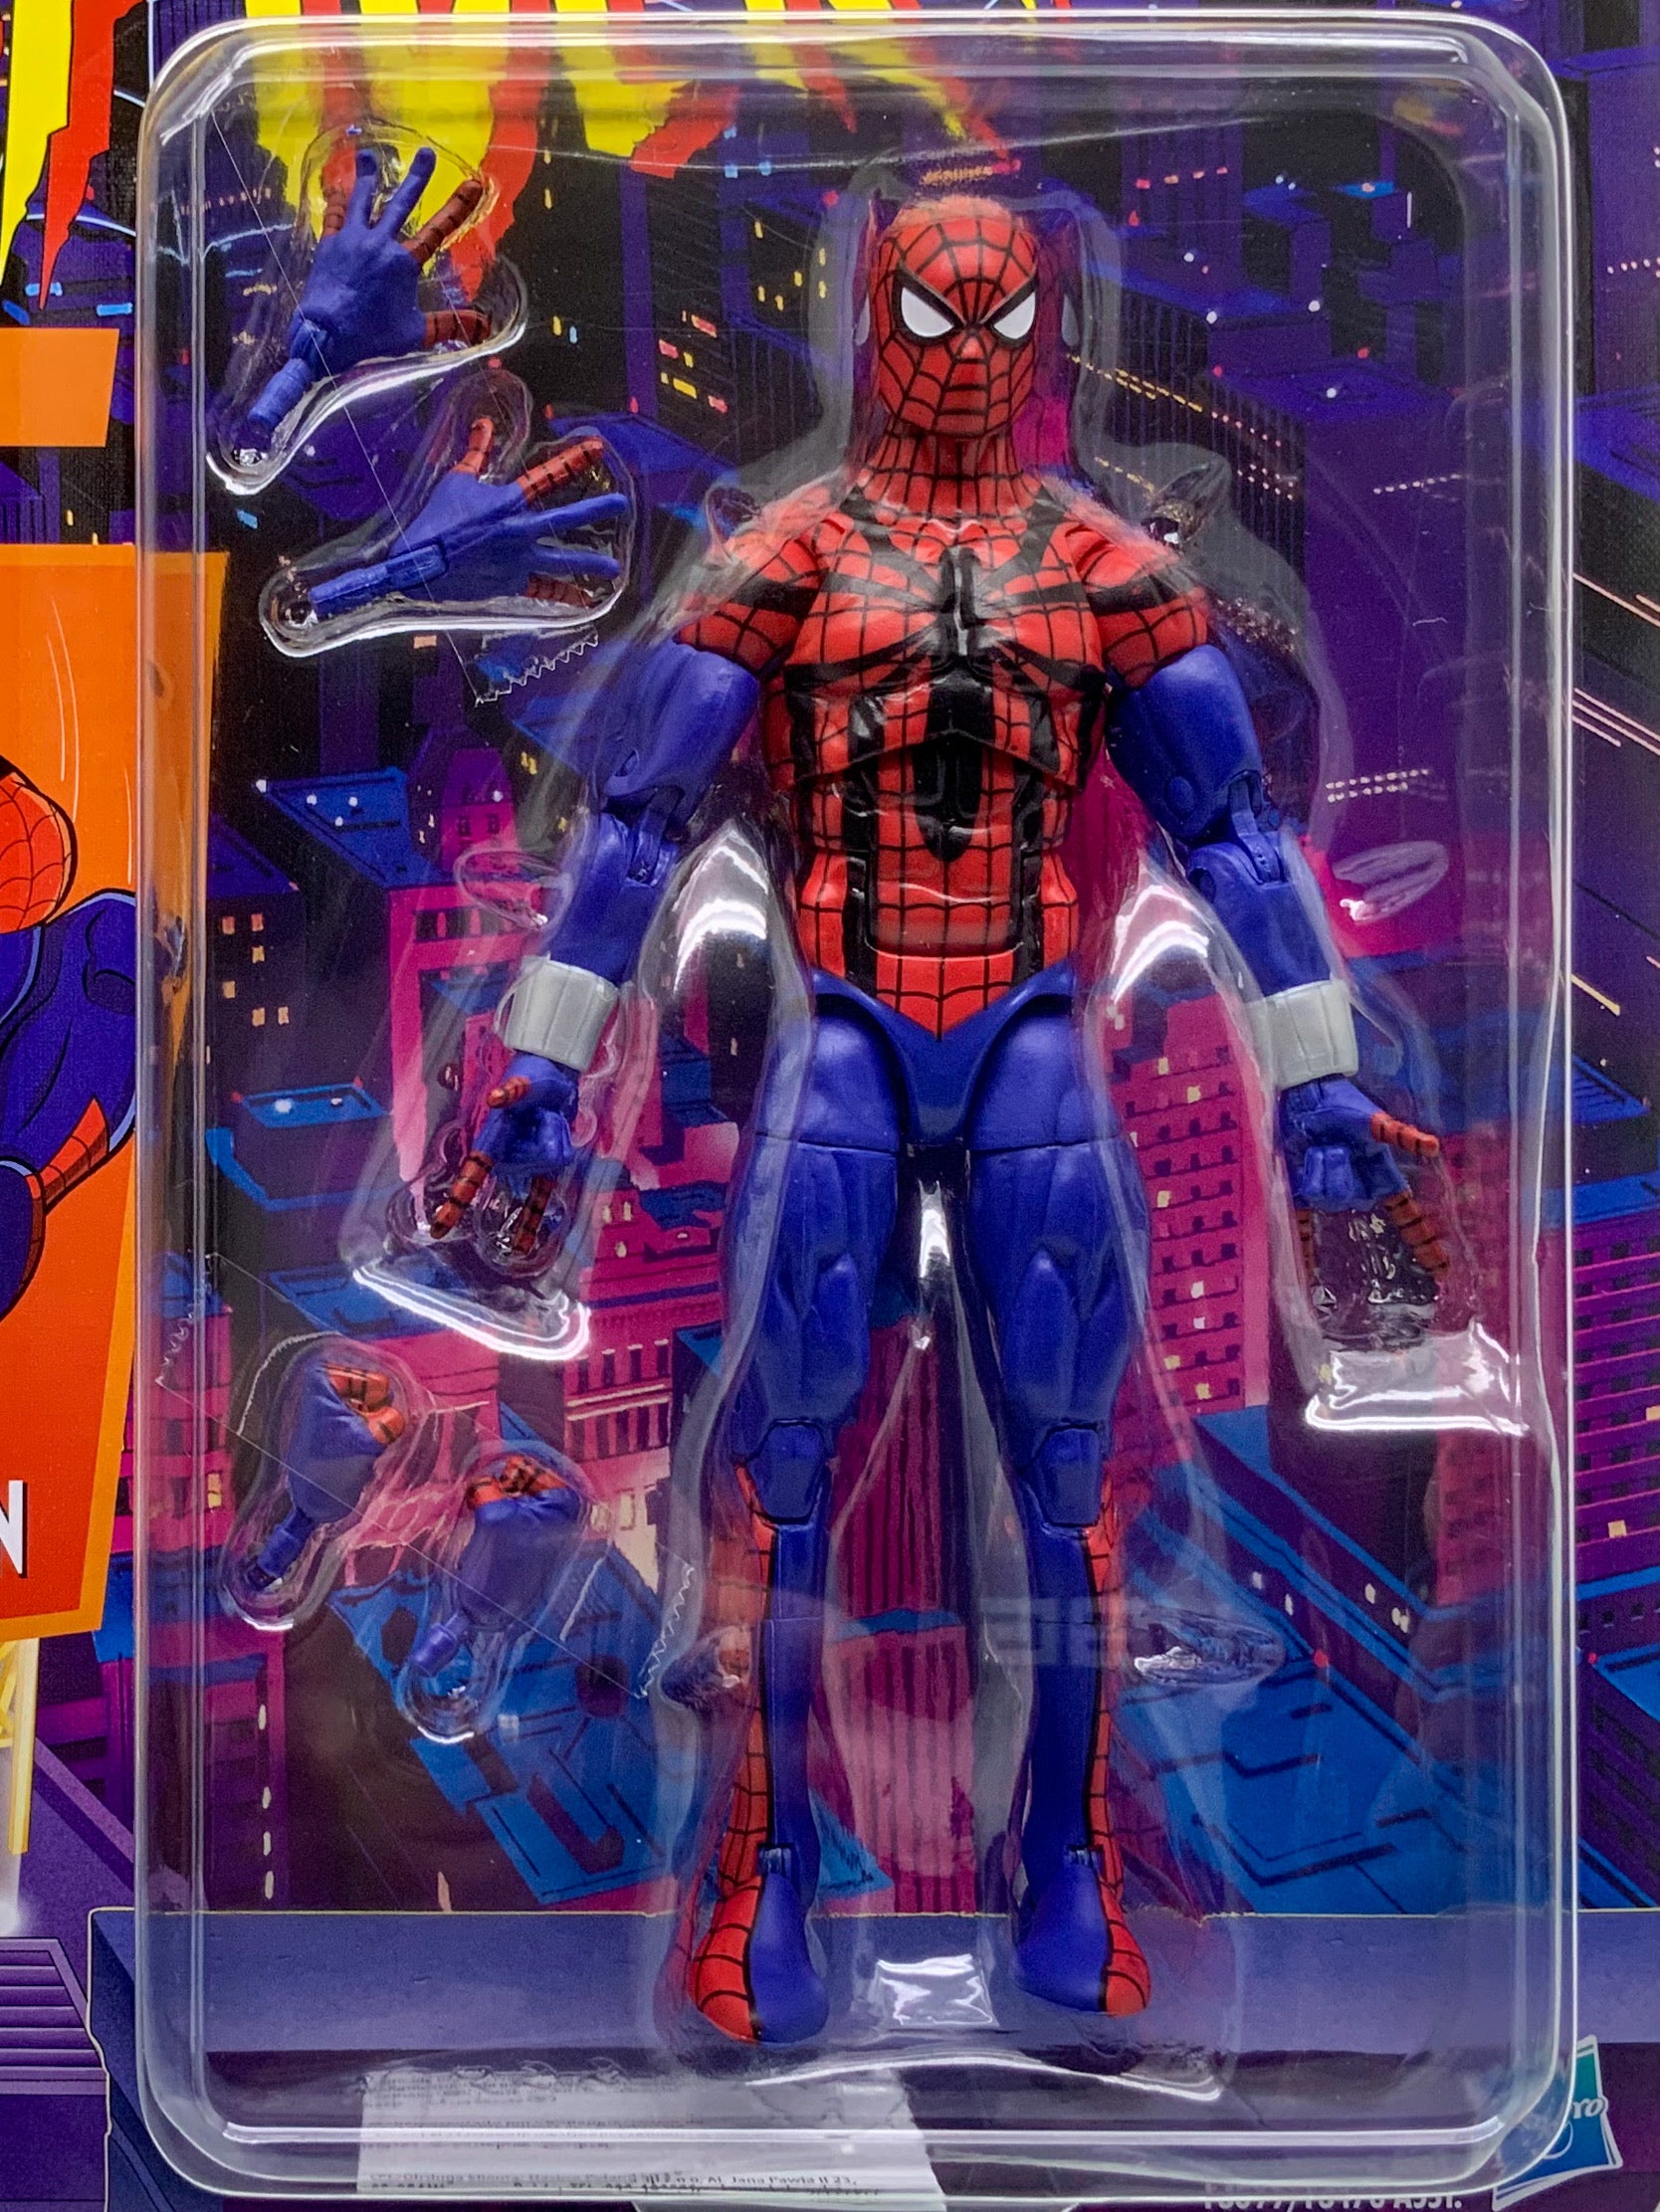 Buy Now at tatoyshop.com  Fans, collectors, and kids alike can enjoy this 6-inch-scale Spider-Man: Ben Reilly figure inspired by the classic Toy Biz Marvel Legends figures This Spider-Man: Ben Reilly figure features classic deco and detailing, including alternate hands and web line FX accessories! Shop Now Tatoy Domestic International Shipping Available New Zealand and Australia  